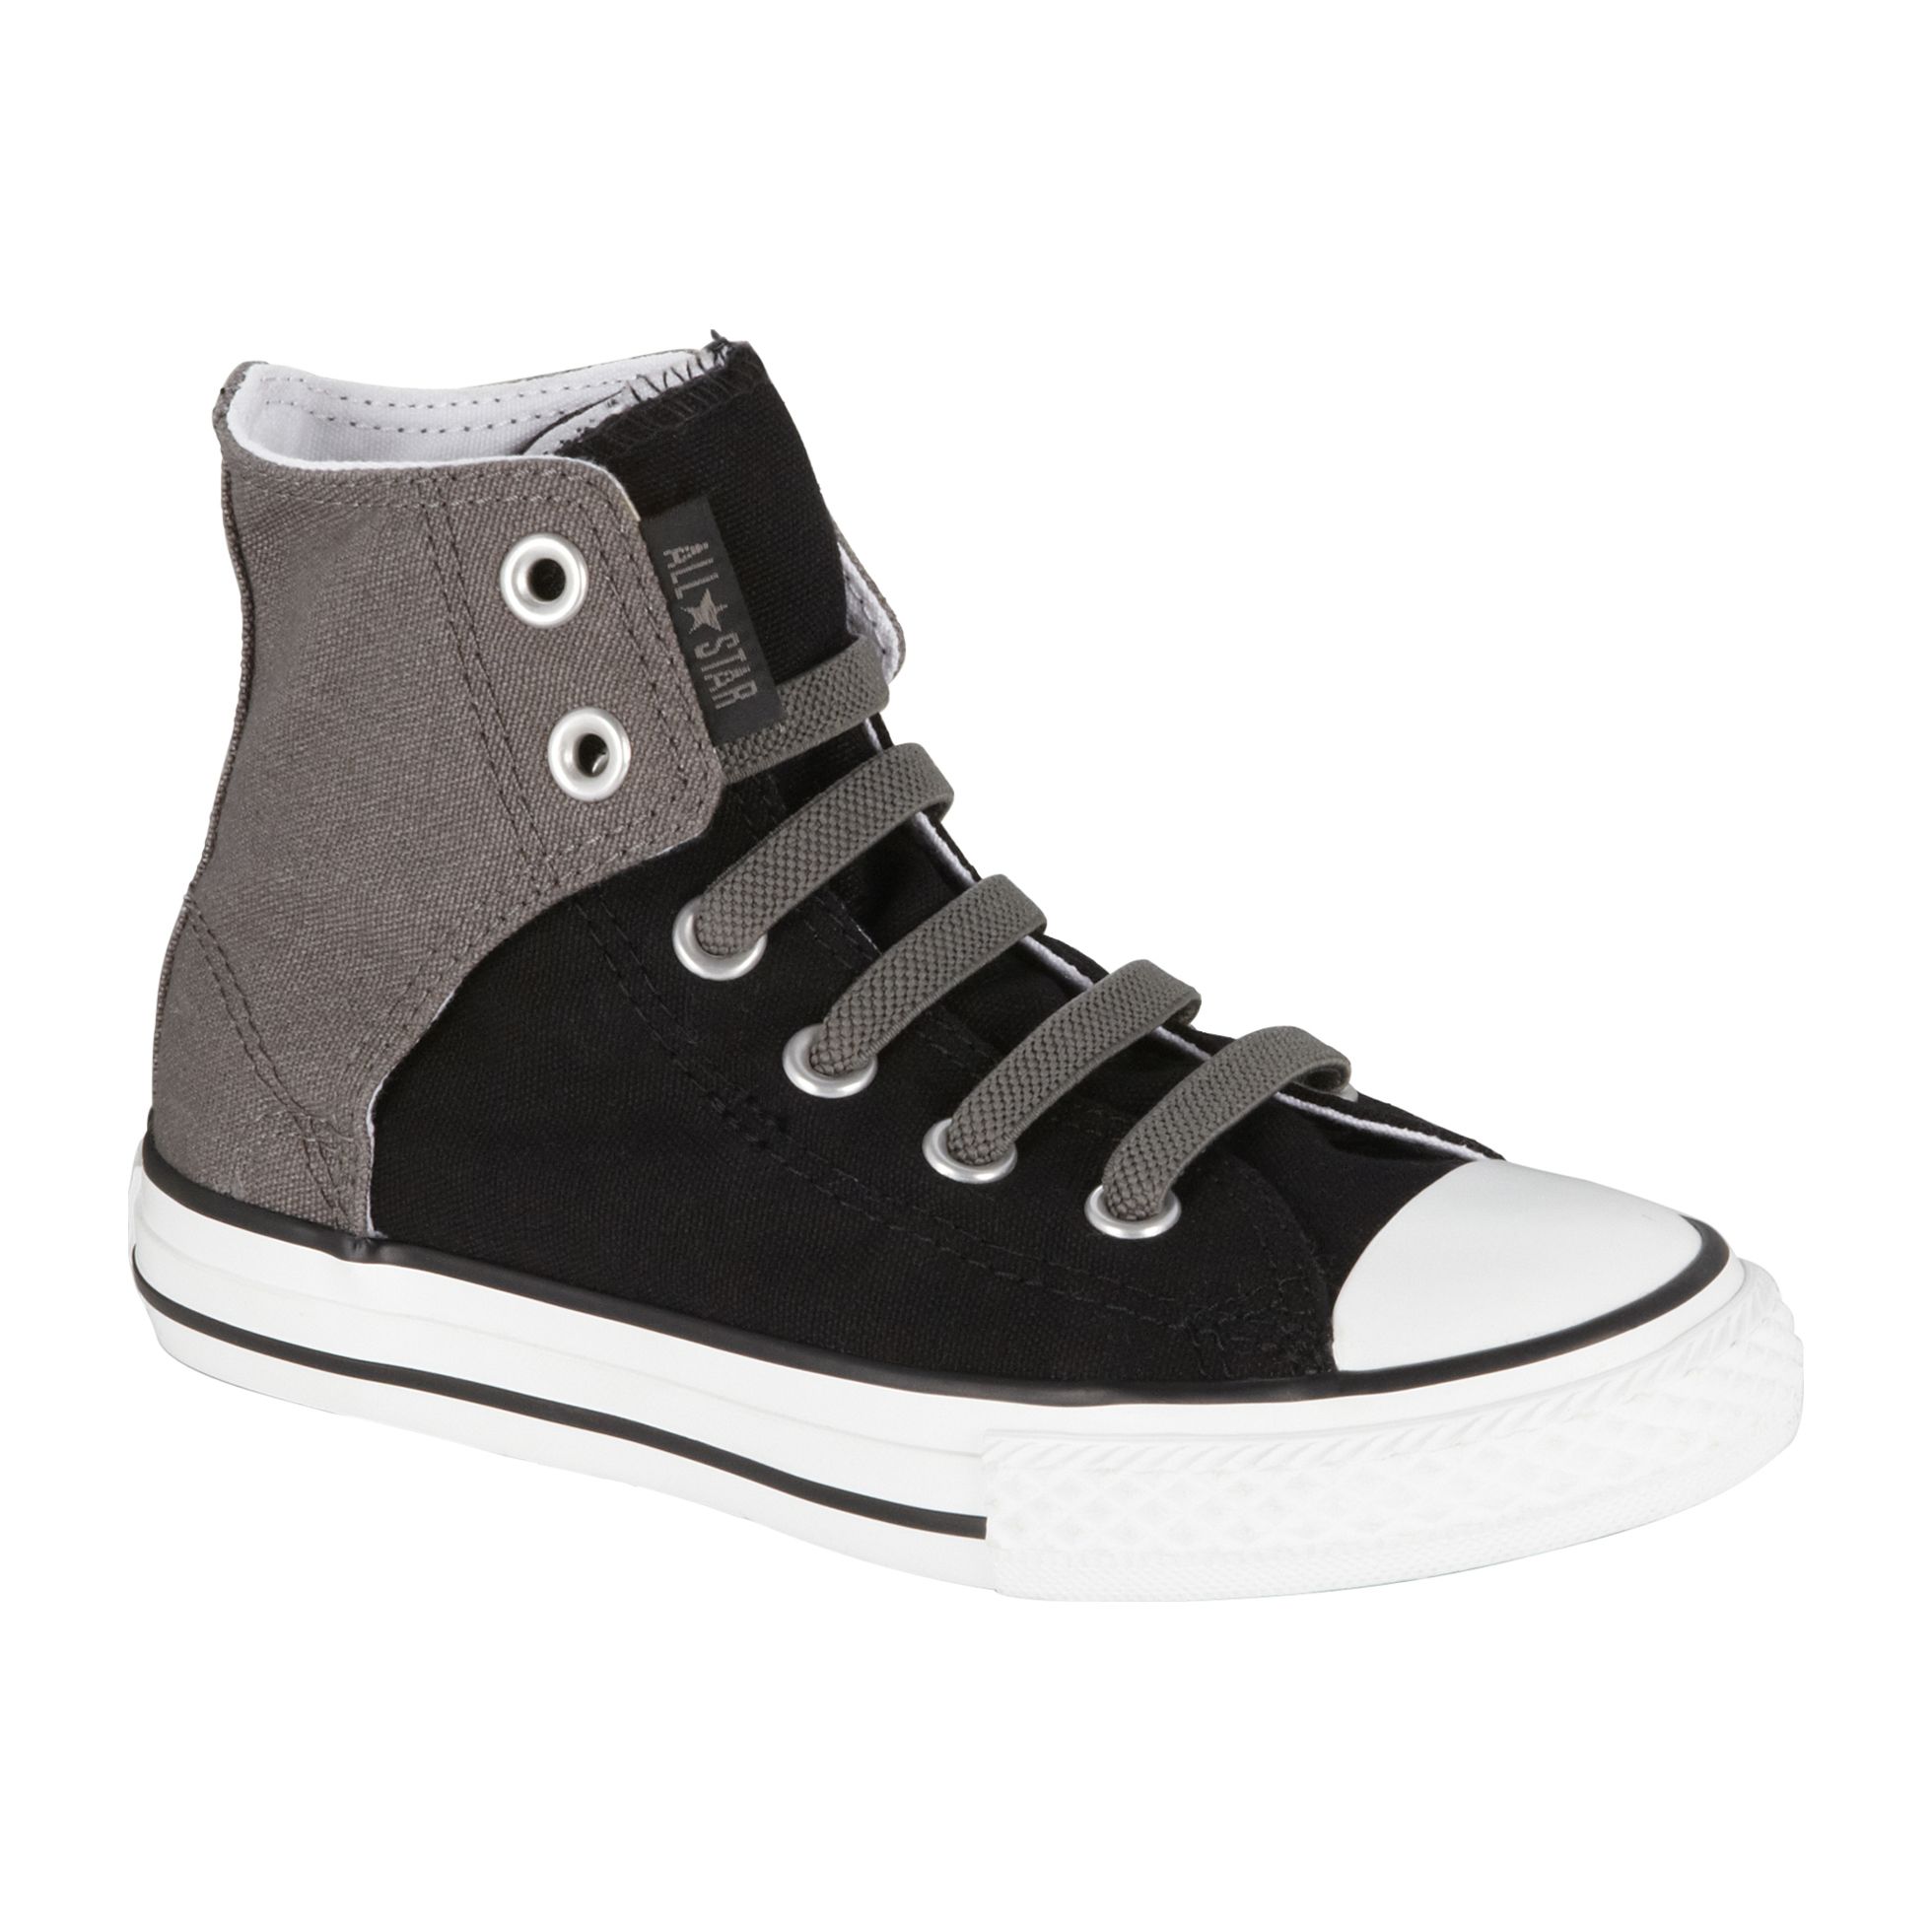 Baby Converse Shoes: Converse Youth 